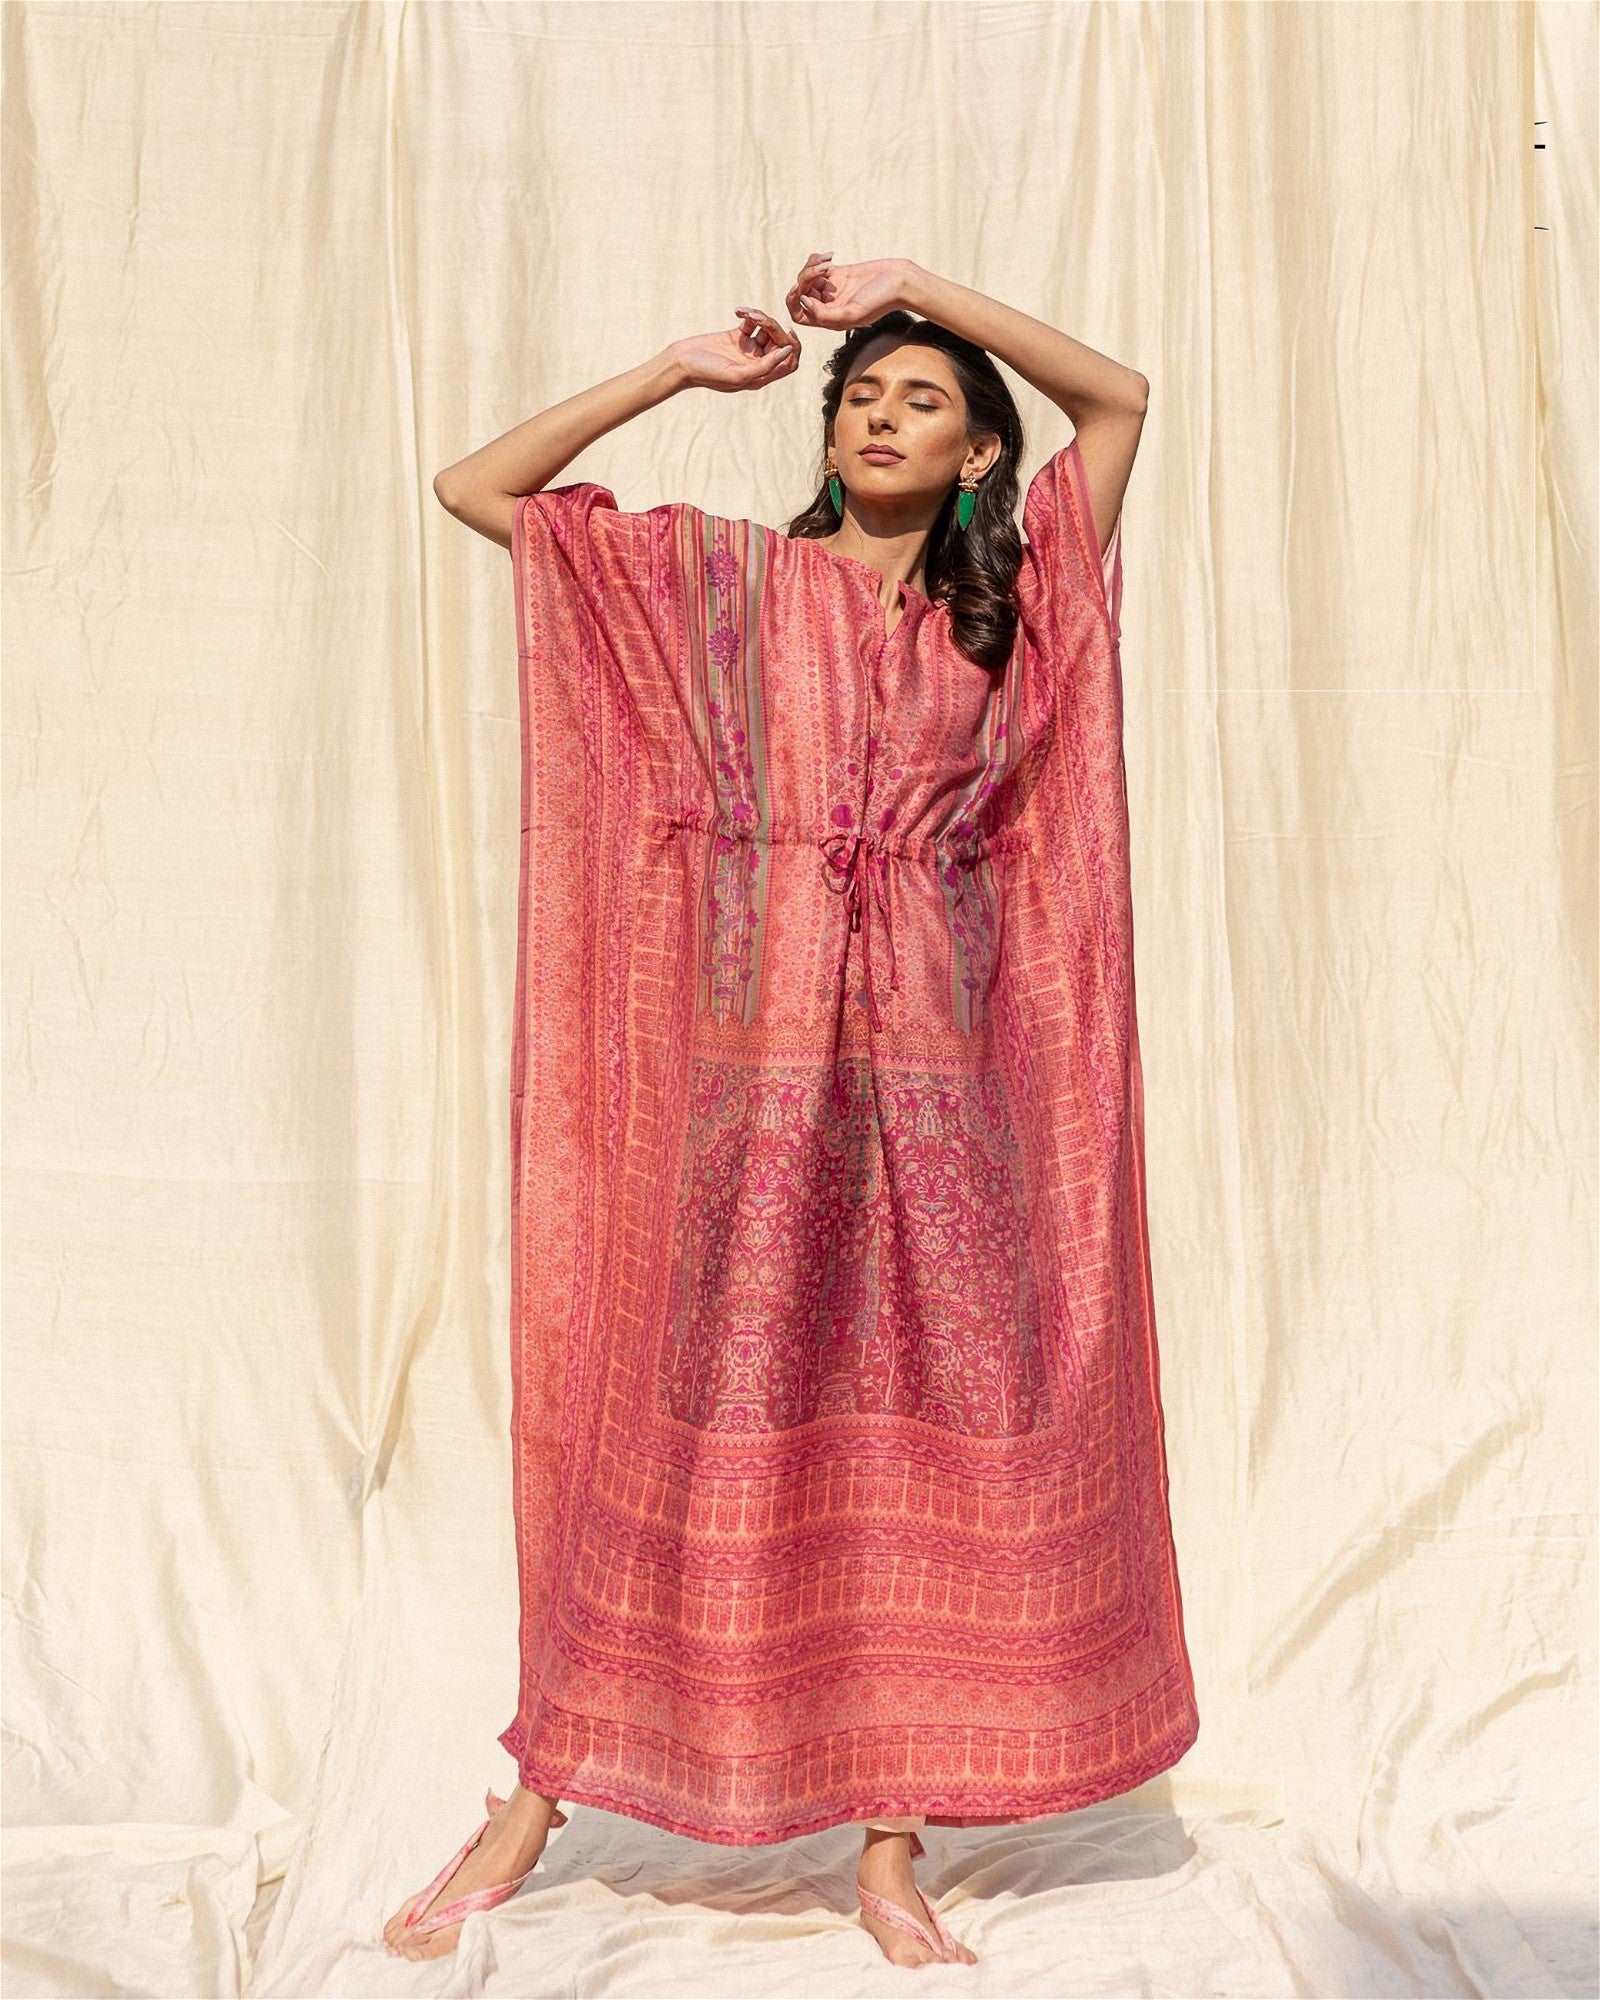 The model in the image is wearing Pink Soft Silk Premium Kaftan from Alice Milan. Crafted with the finest materials and impeccable attention to detail, the Kaftan / Dress looks premium, trendy, luxurious and offers unparalleled comfort. It’s a perfect clothing option for loungewear, resort wear, party wear or for an airport look. The woman in the image looks happy, and confident with her style statement putting a happy smile on her face.